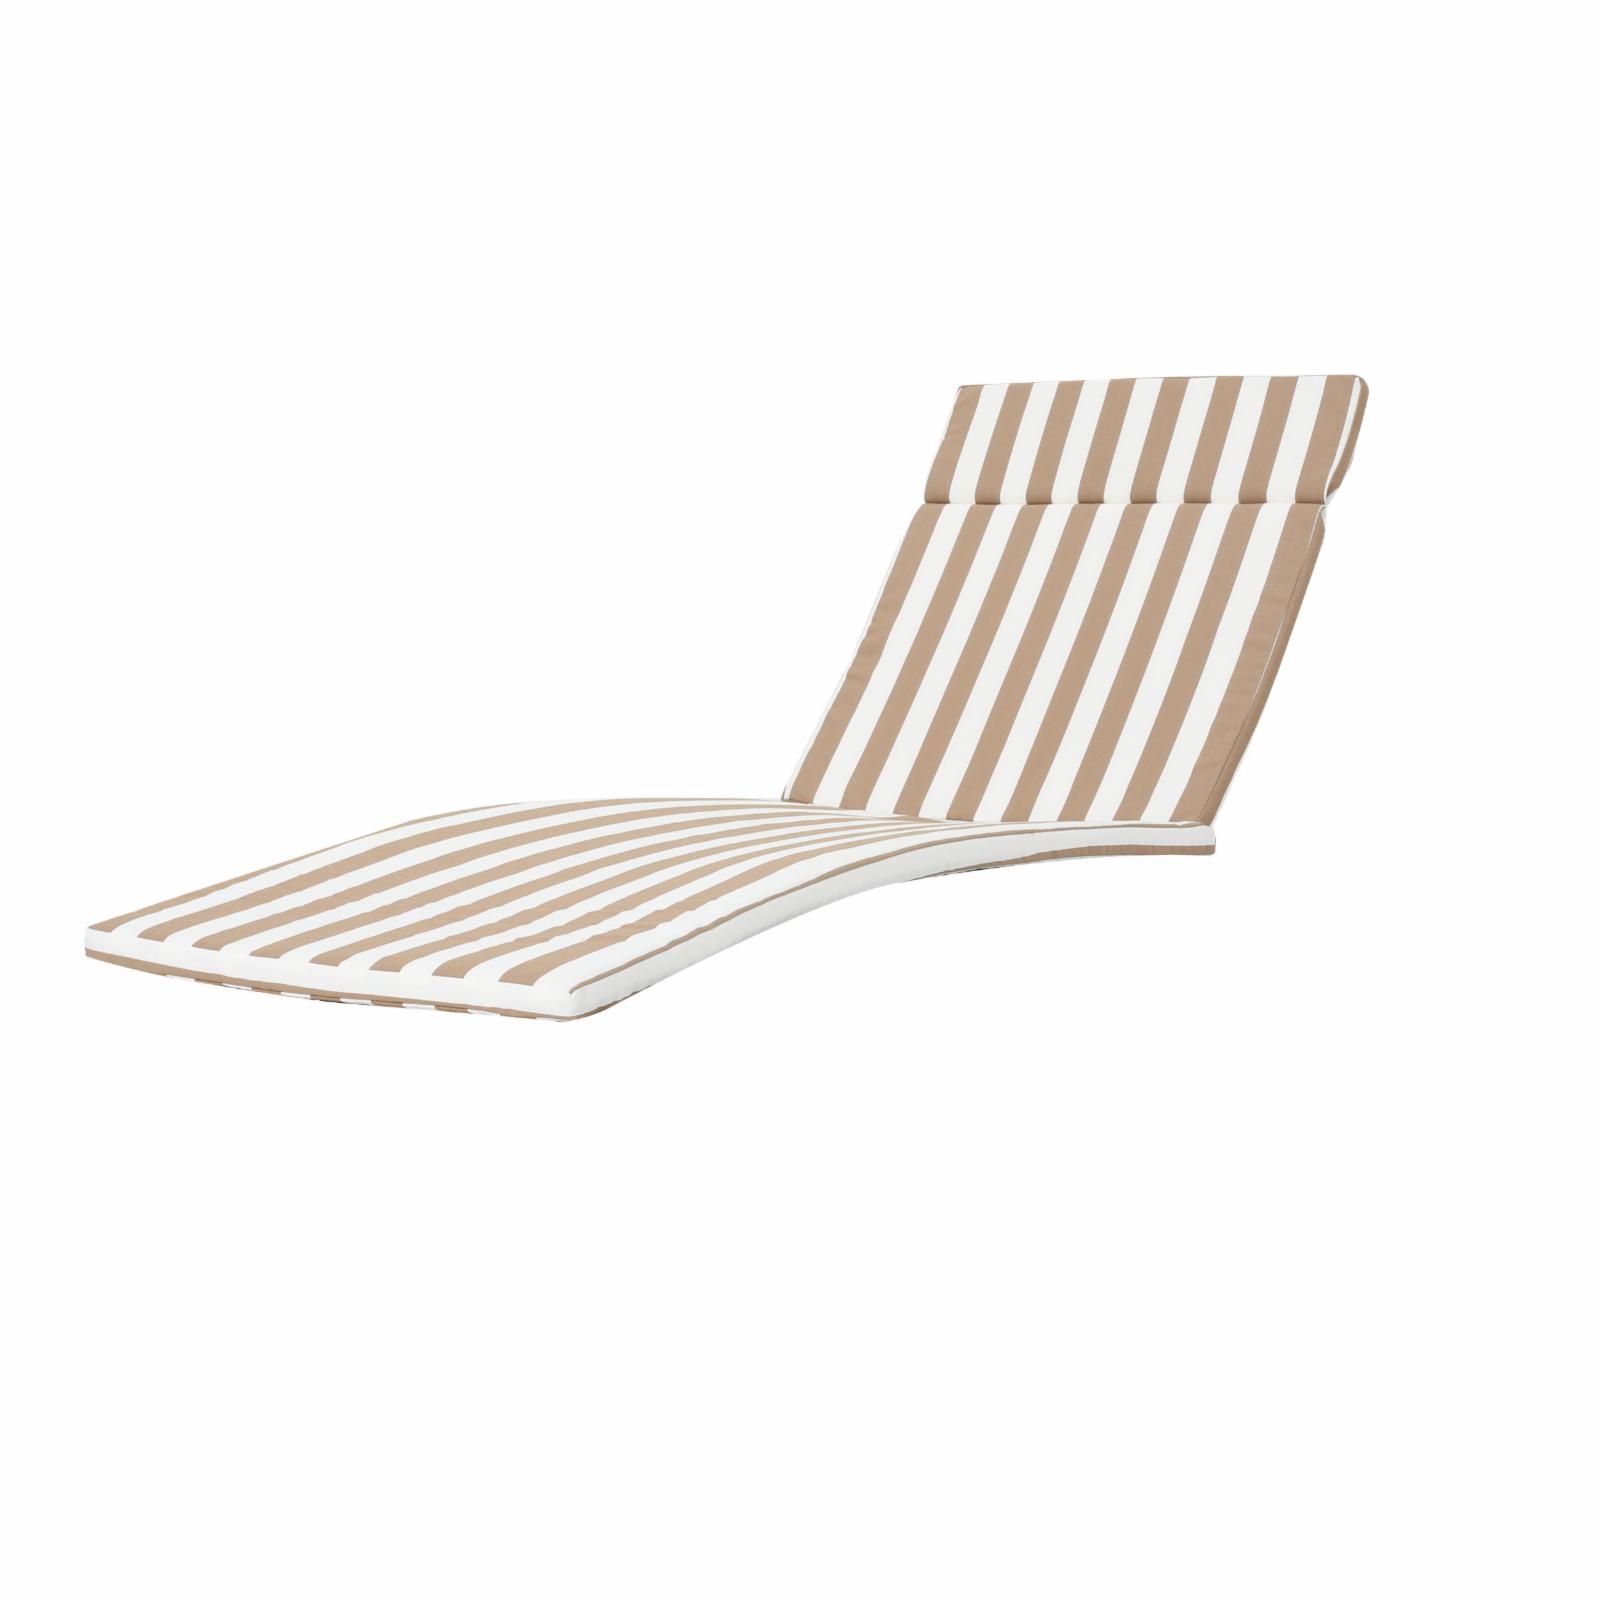 Salem Outdoor Chaise Lounge Cushion - image 1 of 11